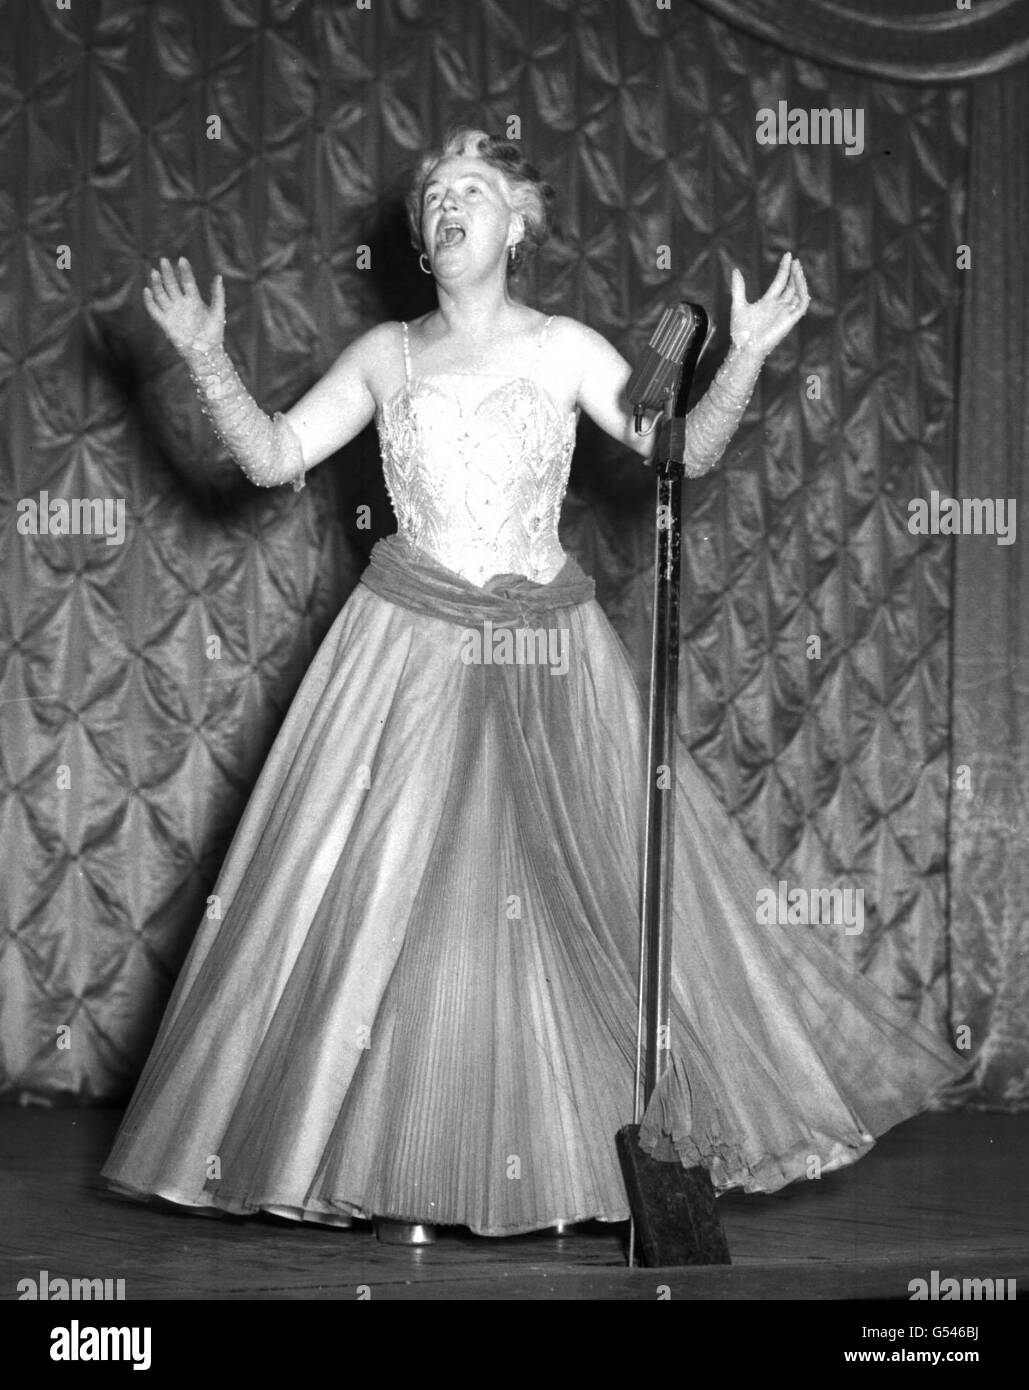 Gracie Fields Royal Variety. Singer Gracie Fields rehearsing for the 1952 Royal Variety Performance at the London Palladium, in London. Stock Photo